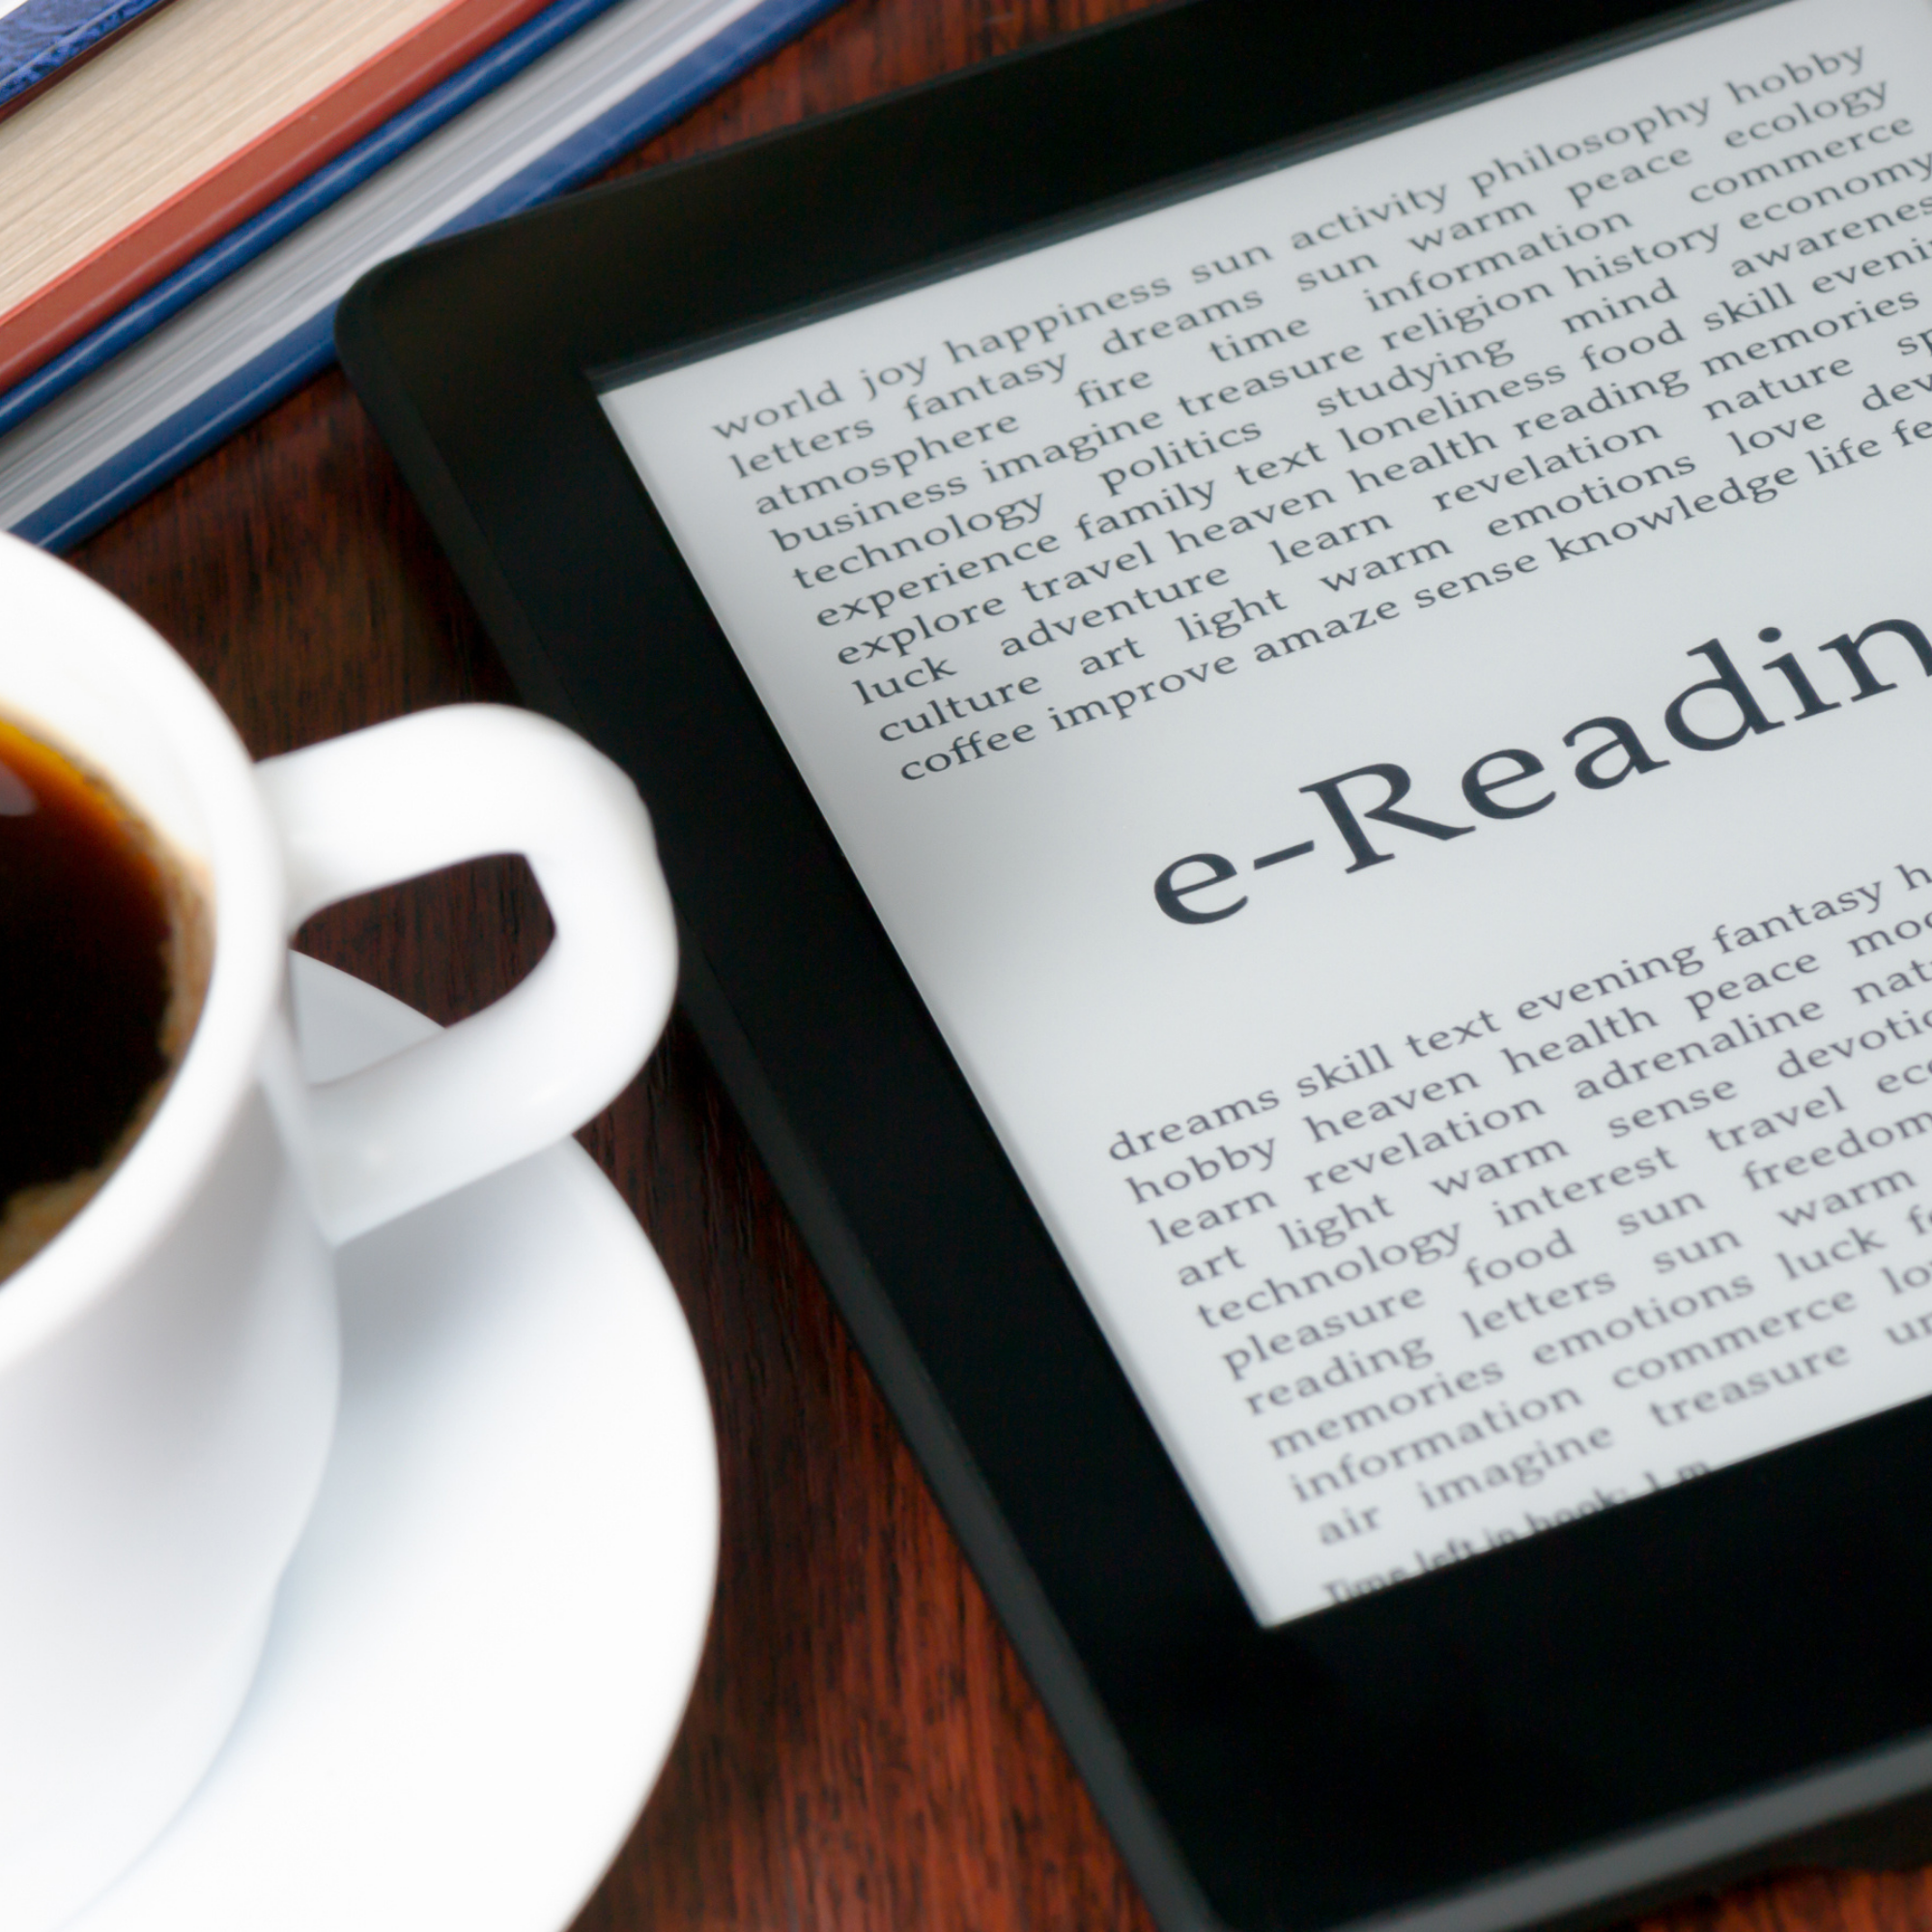 There is a white coffee cup with full of coffee out of frame on the left, and on the right is an e-reader device. 